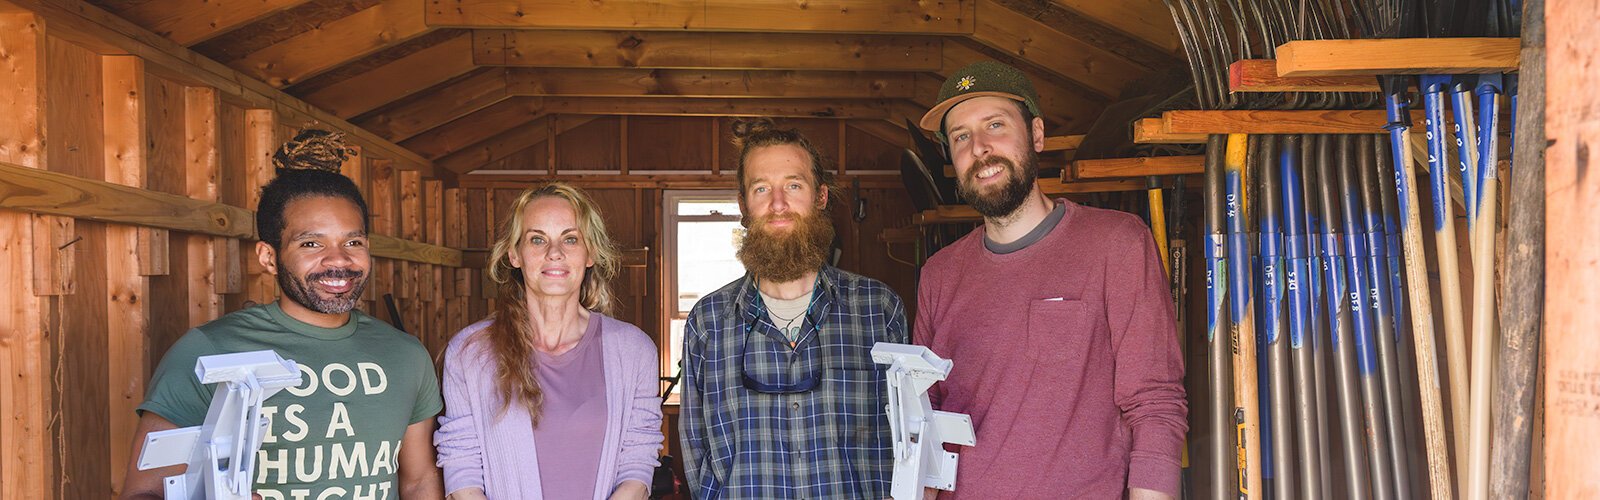 Julius Buzzard, Rebecca Mackey, Christopher Hallett, and Doug Reith at Growing Hope's tool lending library.